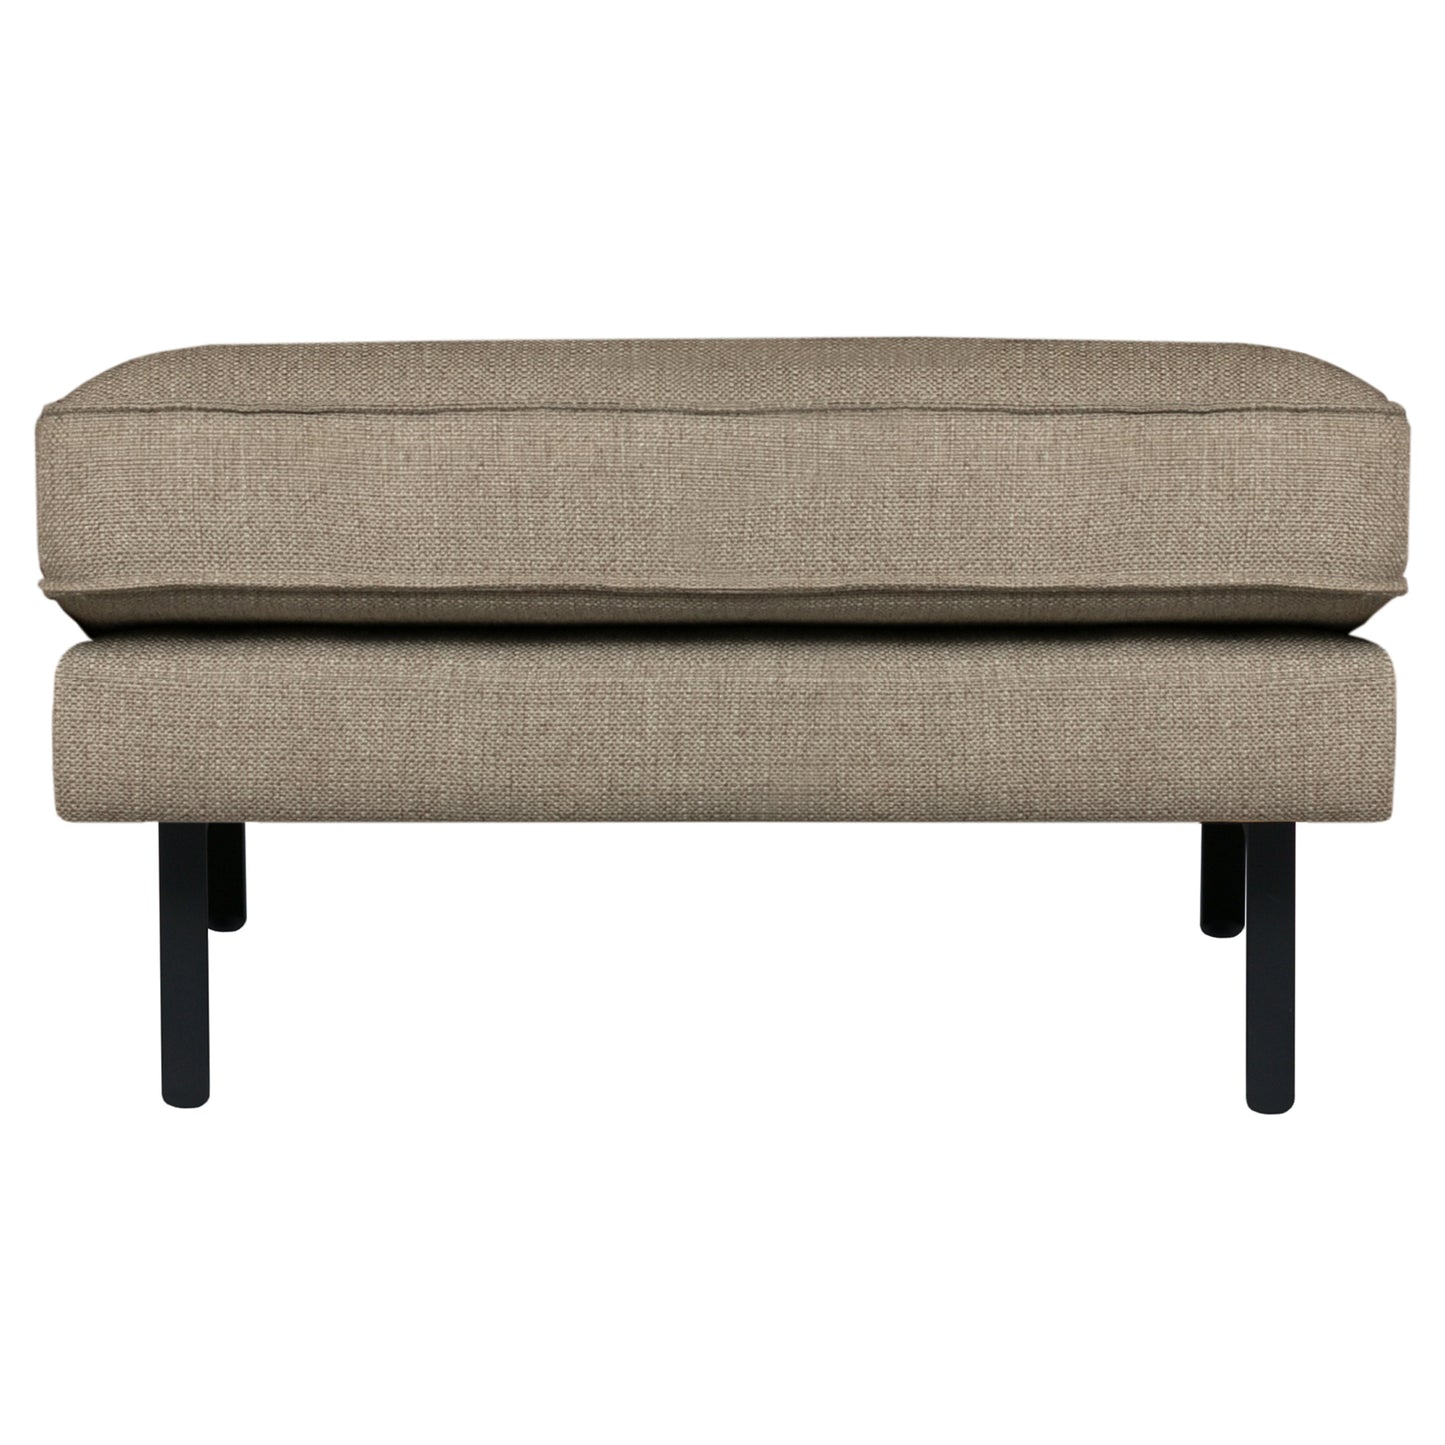 BEPUREHOME | Rodeo Stretched - Puff, Brown Melange